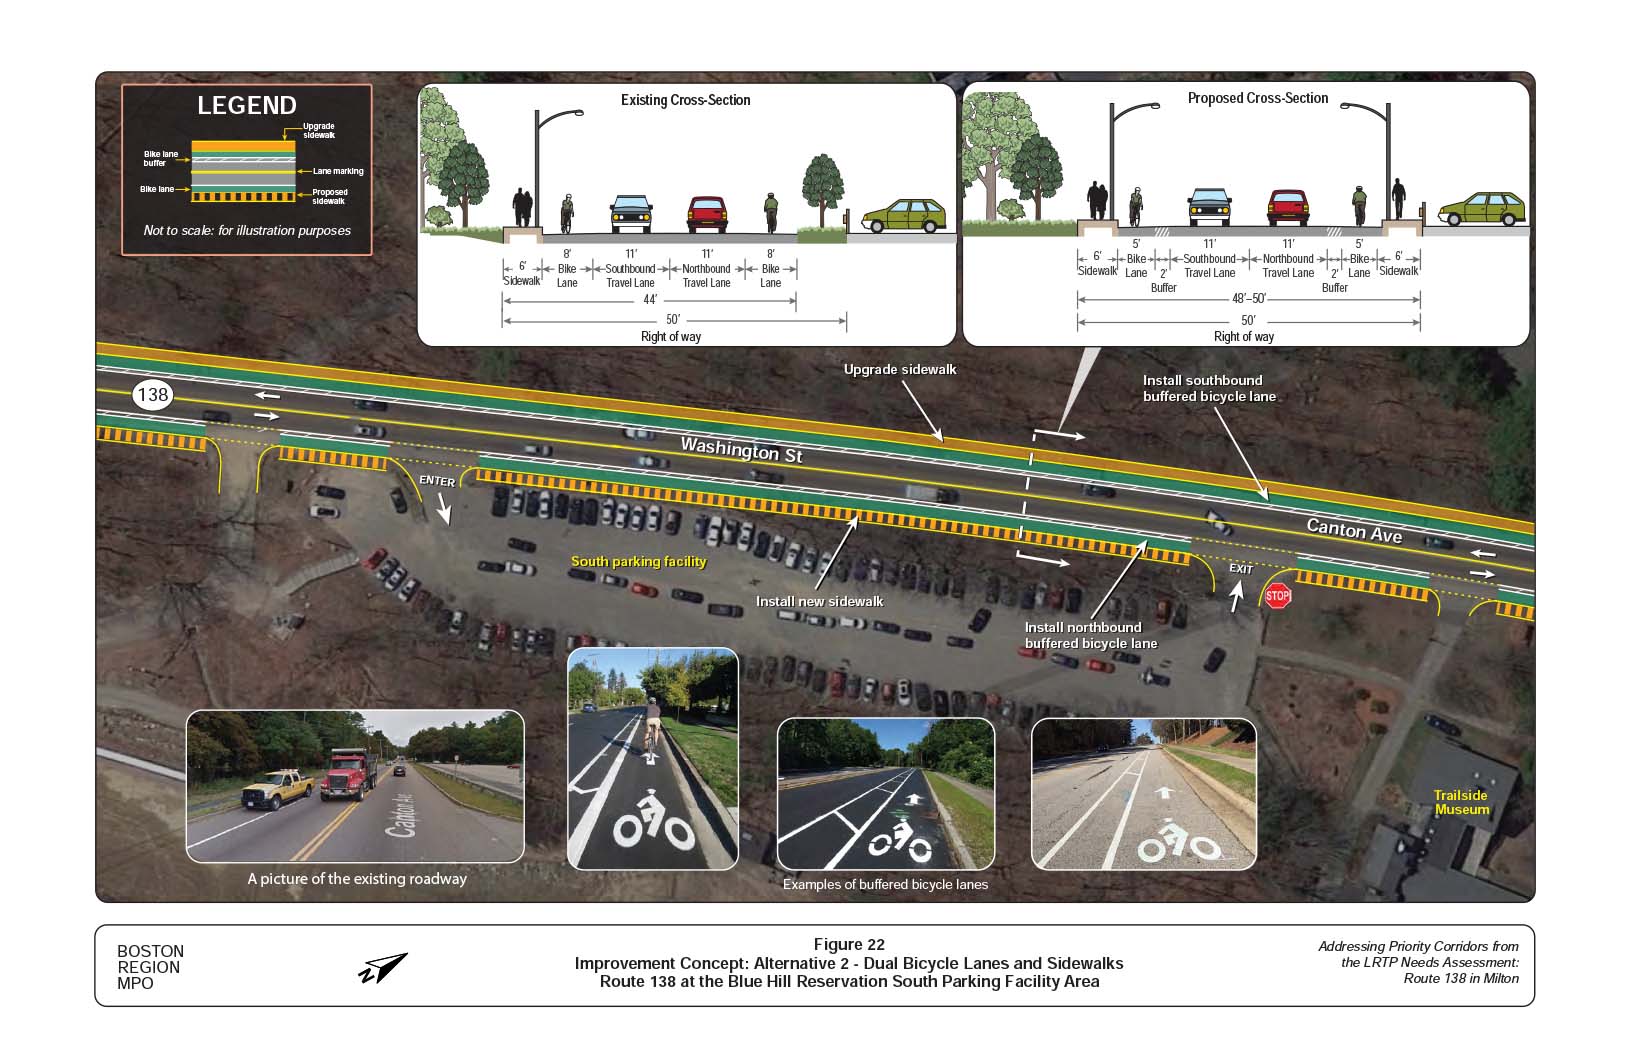 Figure 22 is an aerial photo of Route 138 at the Blue Hills Reservation south parking facility showing Alternative 2, dual bicycle lanes and sidewalks; and overlays showing the existing and proposed cross-sections.